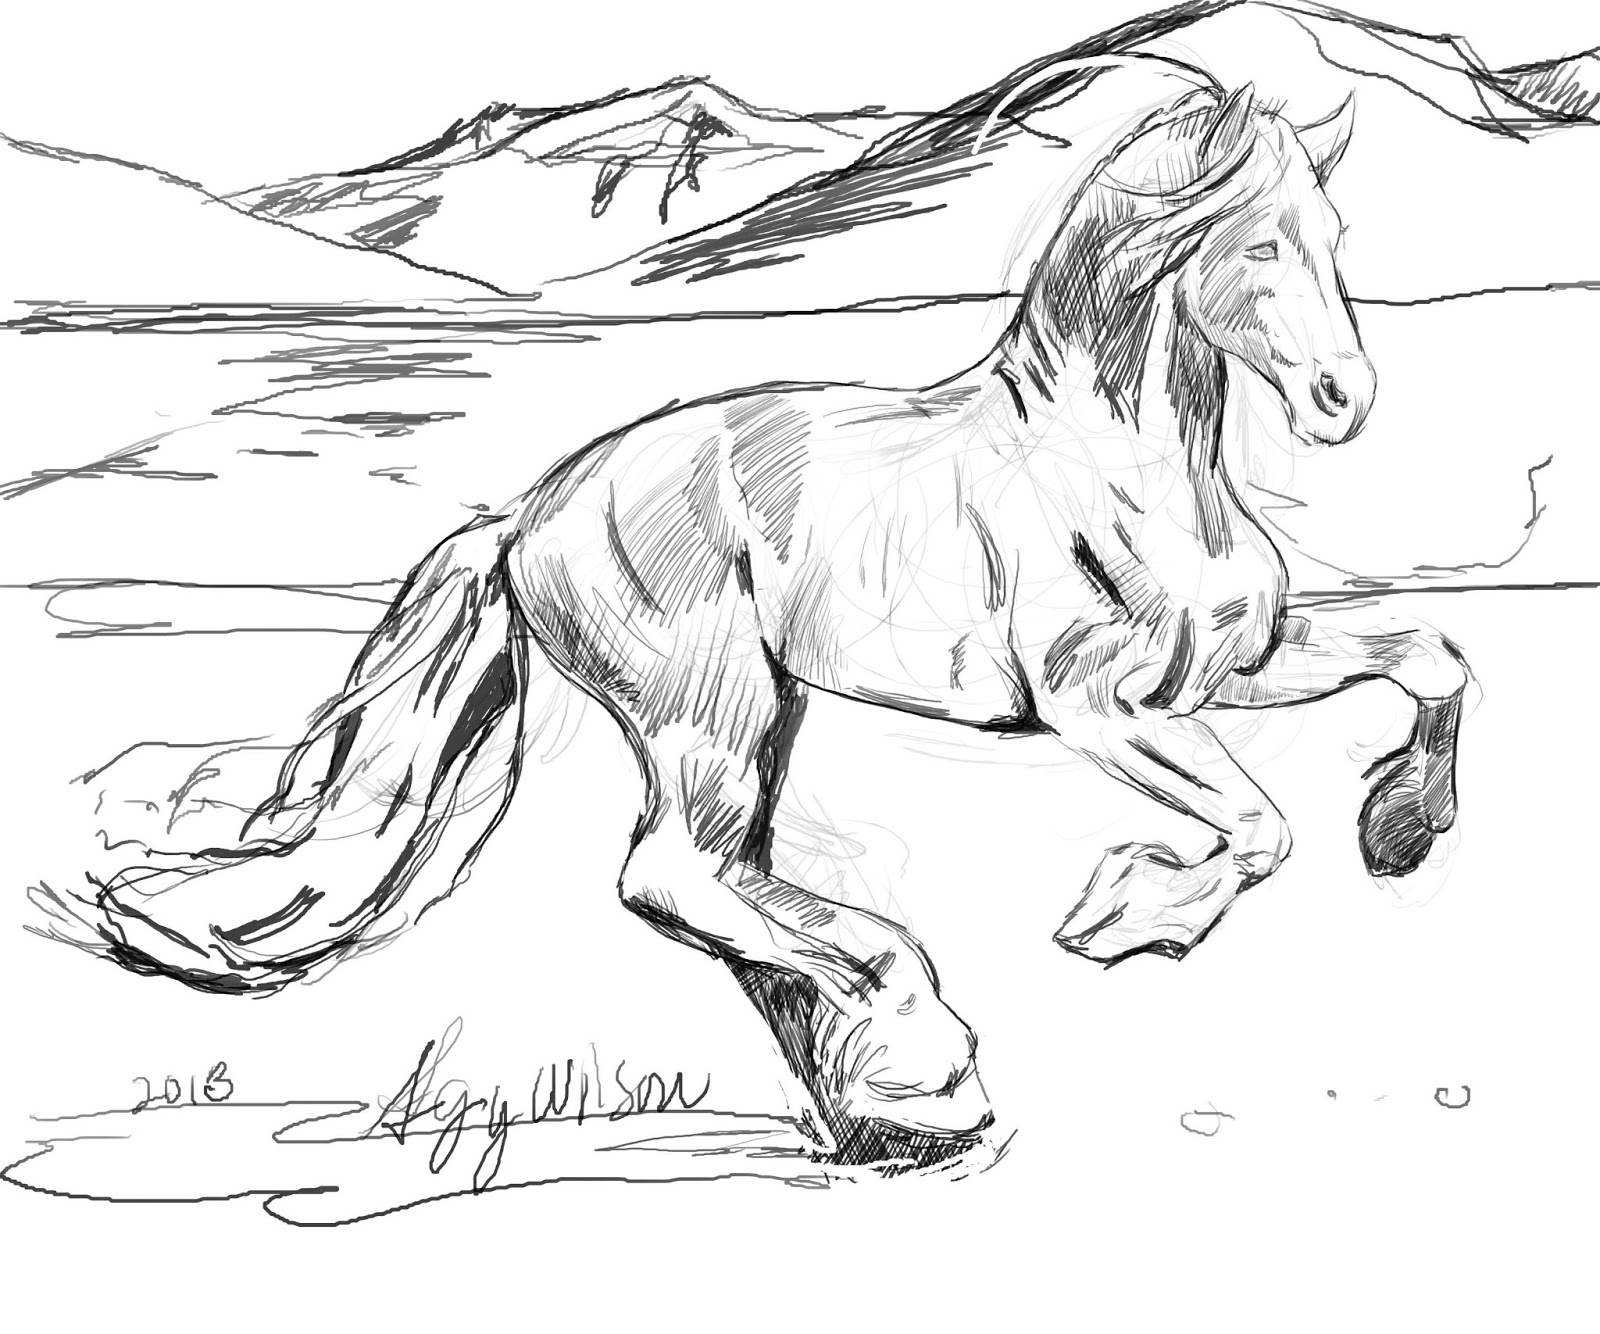 Horse Herd Coloring Pages at GetColorings.com | Free printable